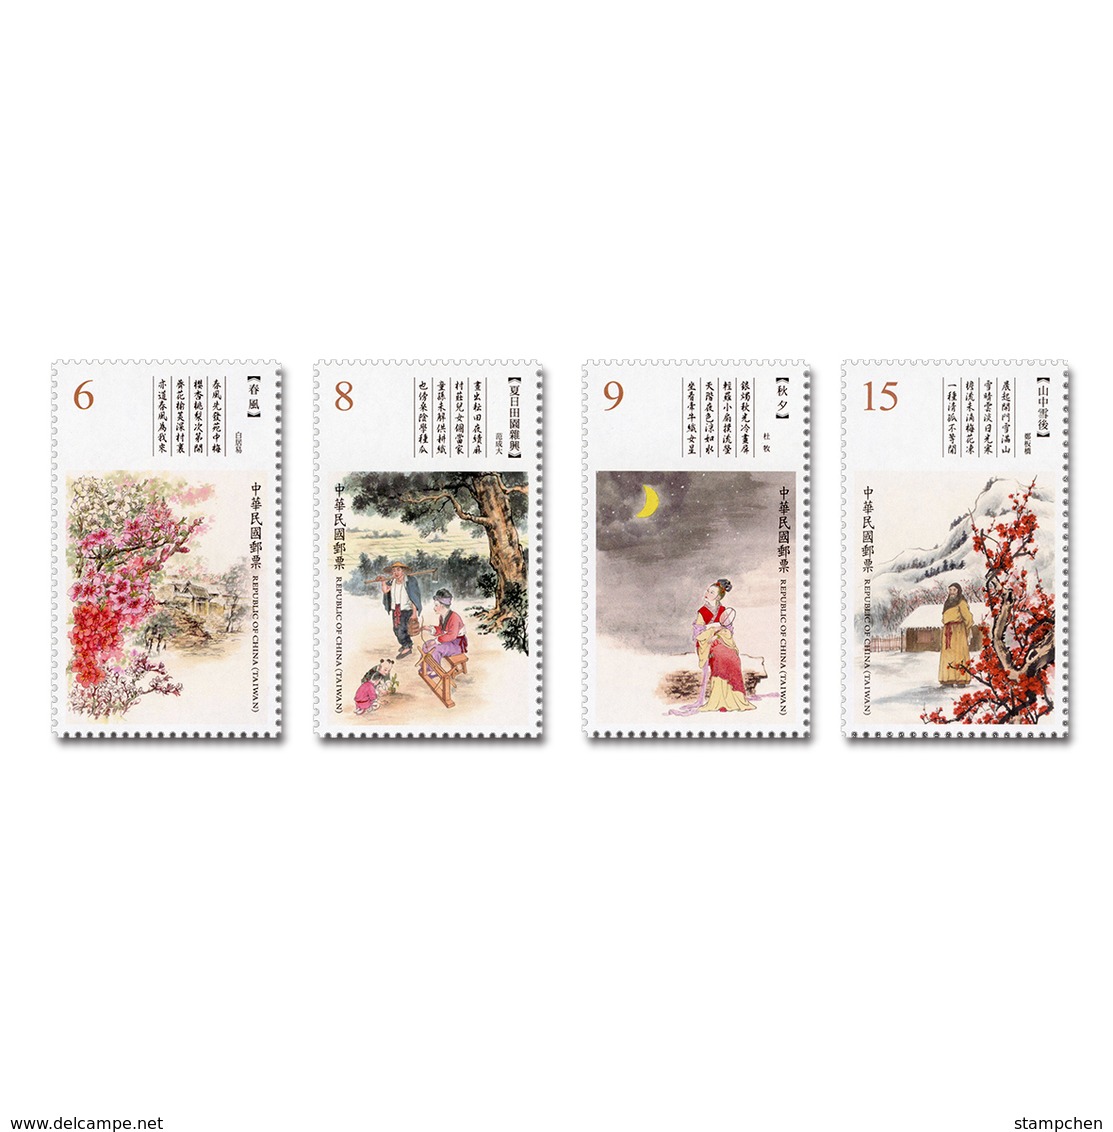 2019 Ancient Chinese Poetry Stamps - 4 Seasons Plums Cherry Textile Moon Snow Costume - Textil